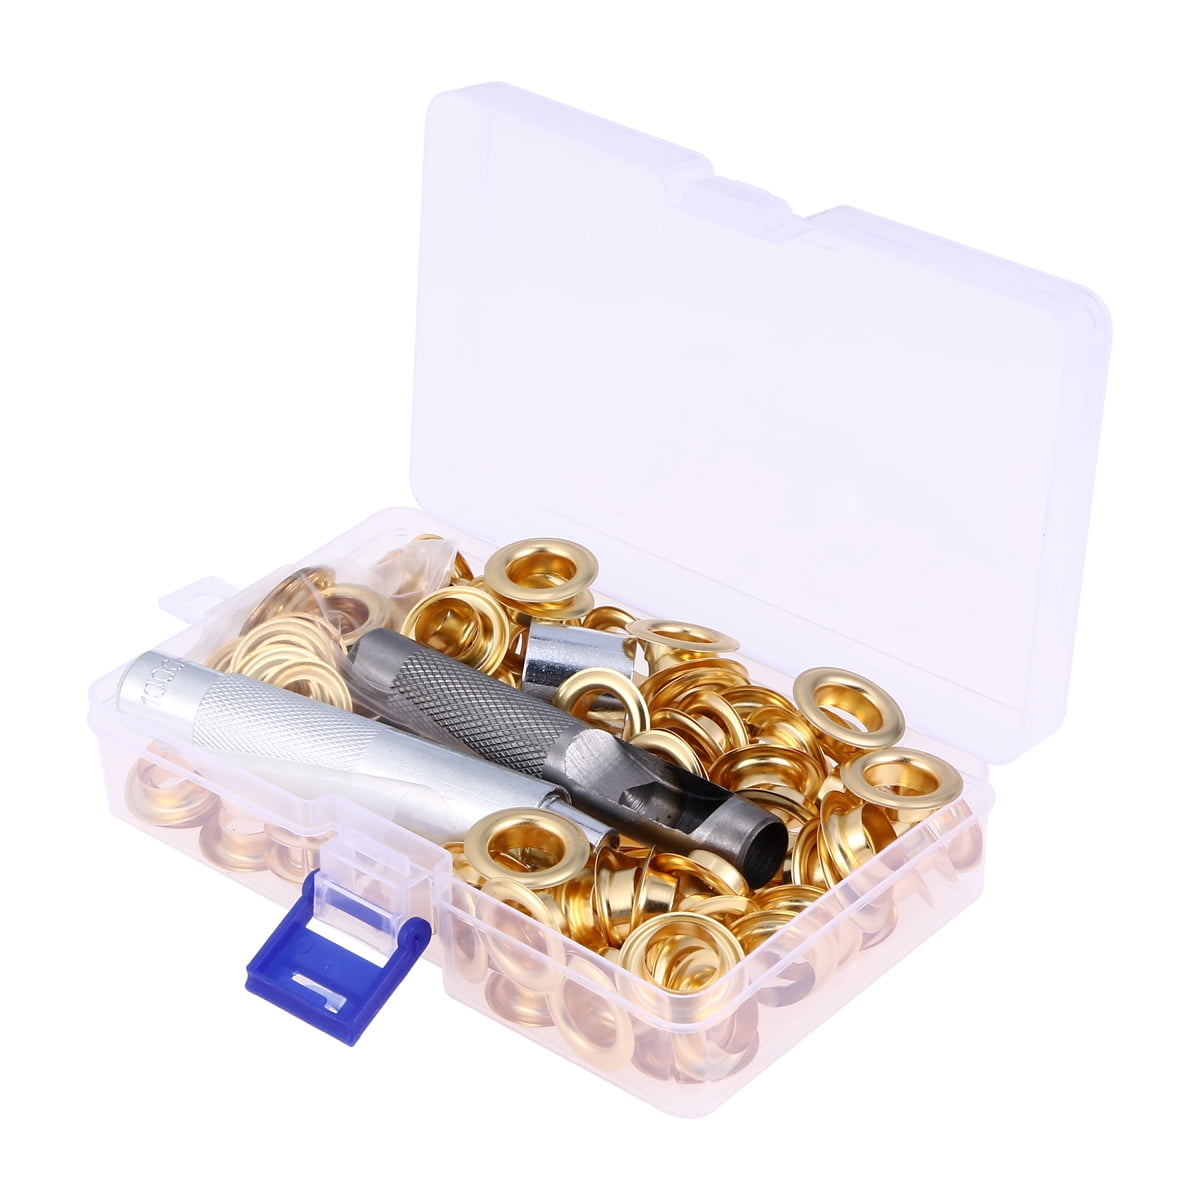 Grommet Tool Kit 1/2 Inch 150 Sets Eyelets and Grommets and 3 Pieces  Installation Metal Grommet Kit with Storage Case by MoHern